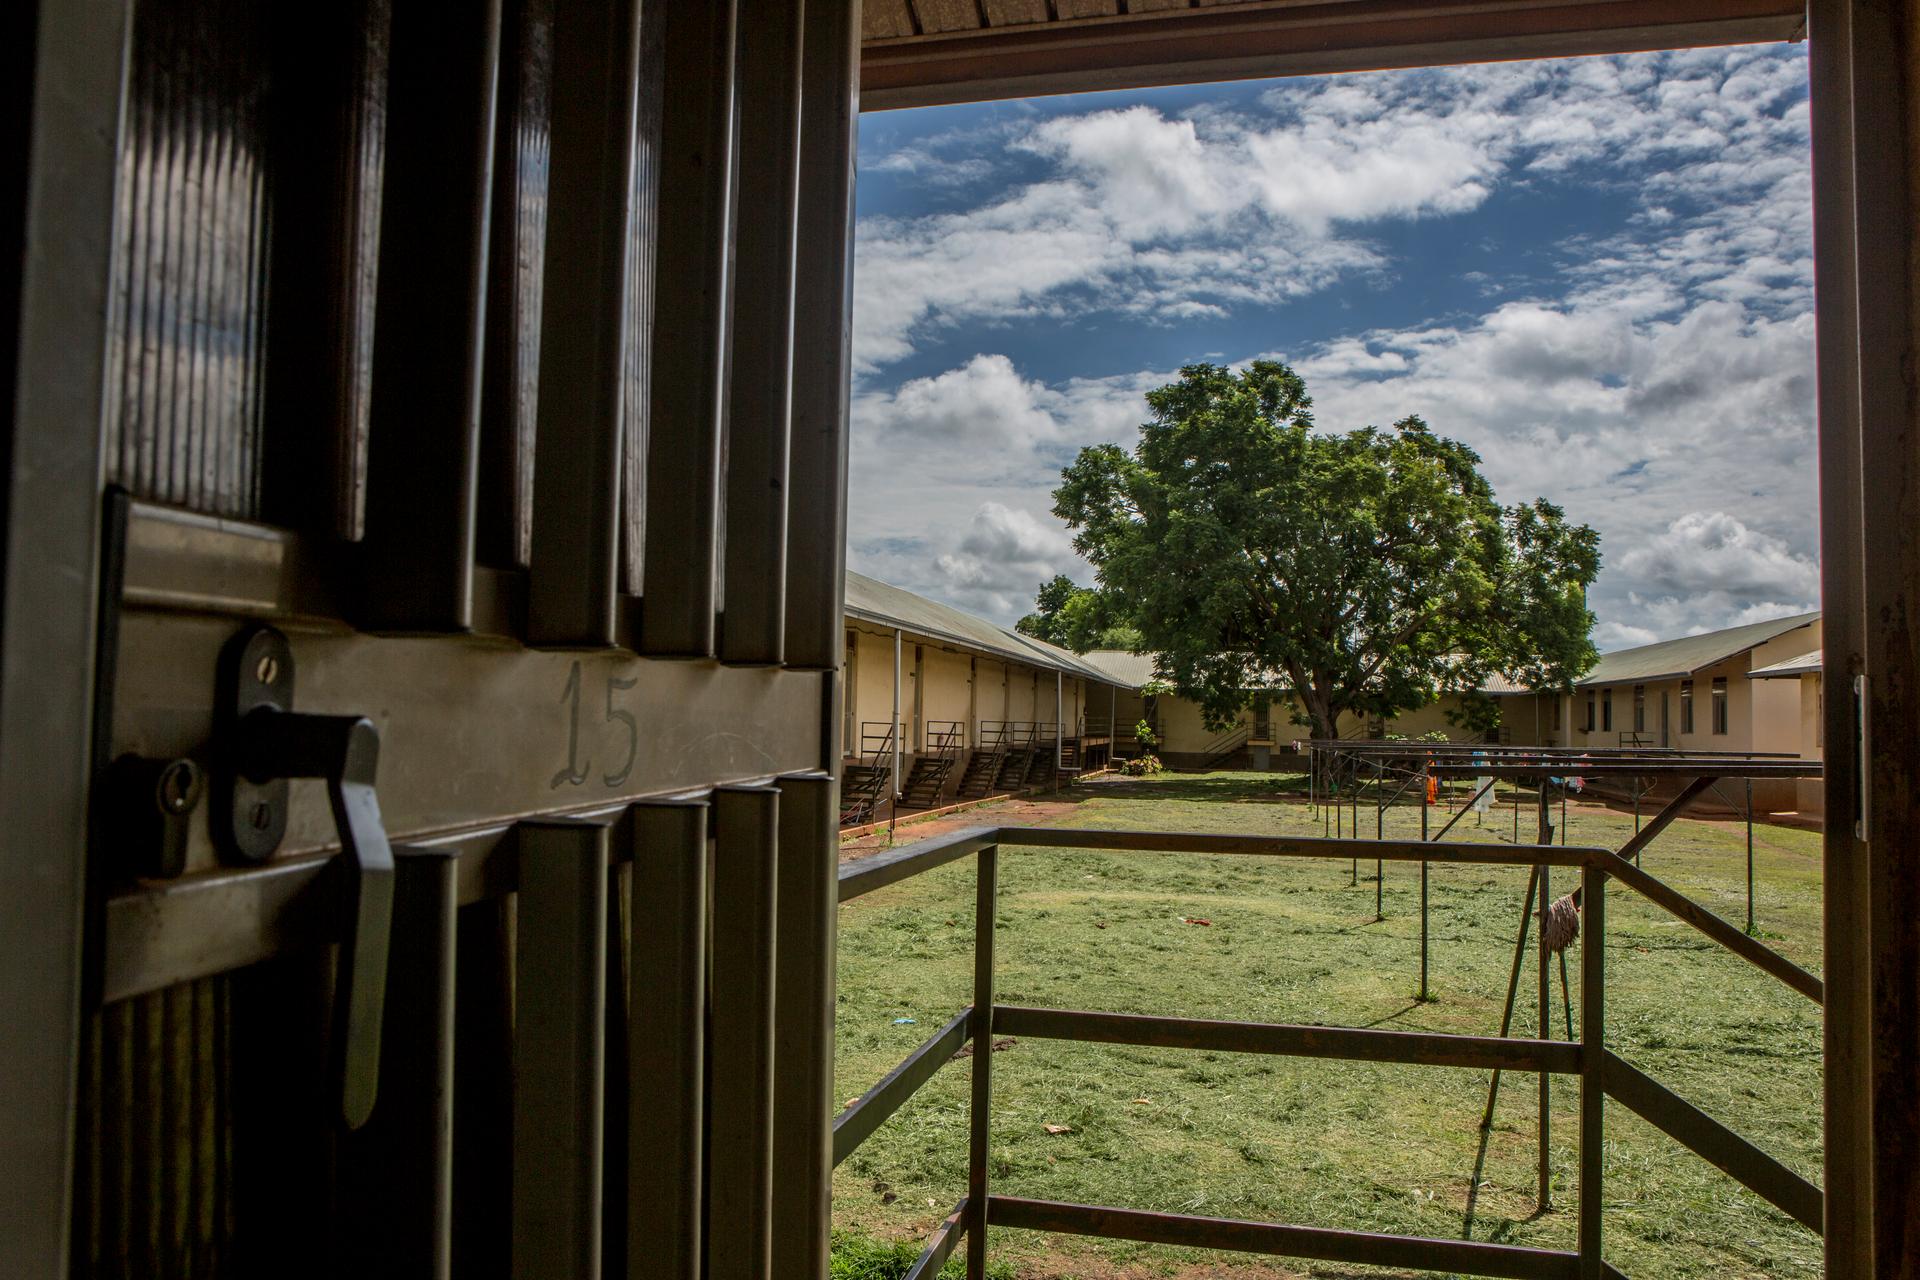 Looking out of a door in the dormitory at St. Monica's Vocational School in Gulu, Uganda.